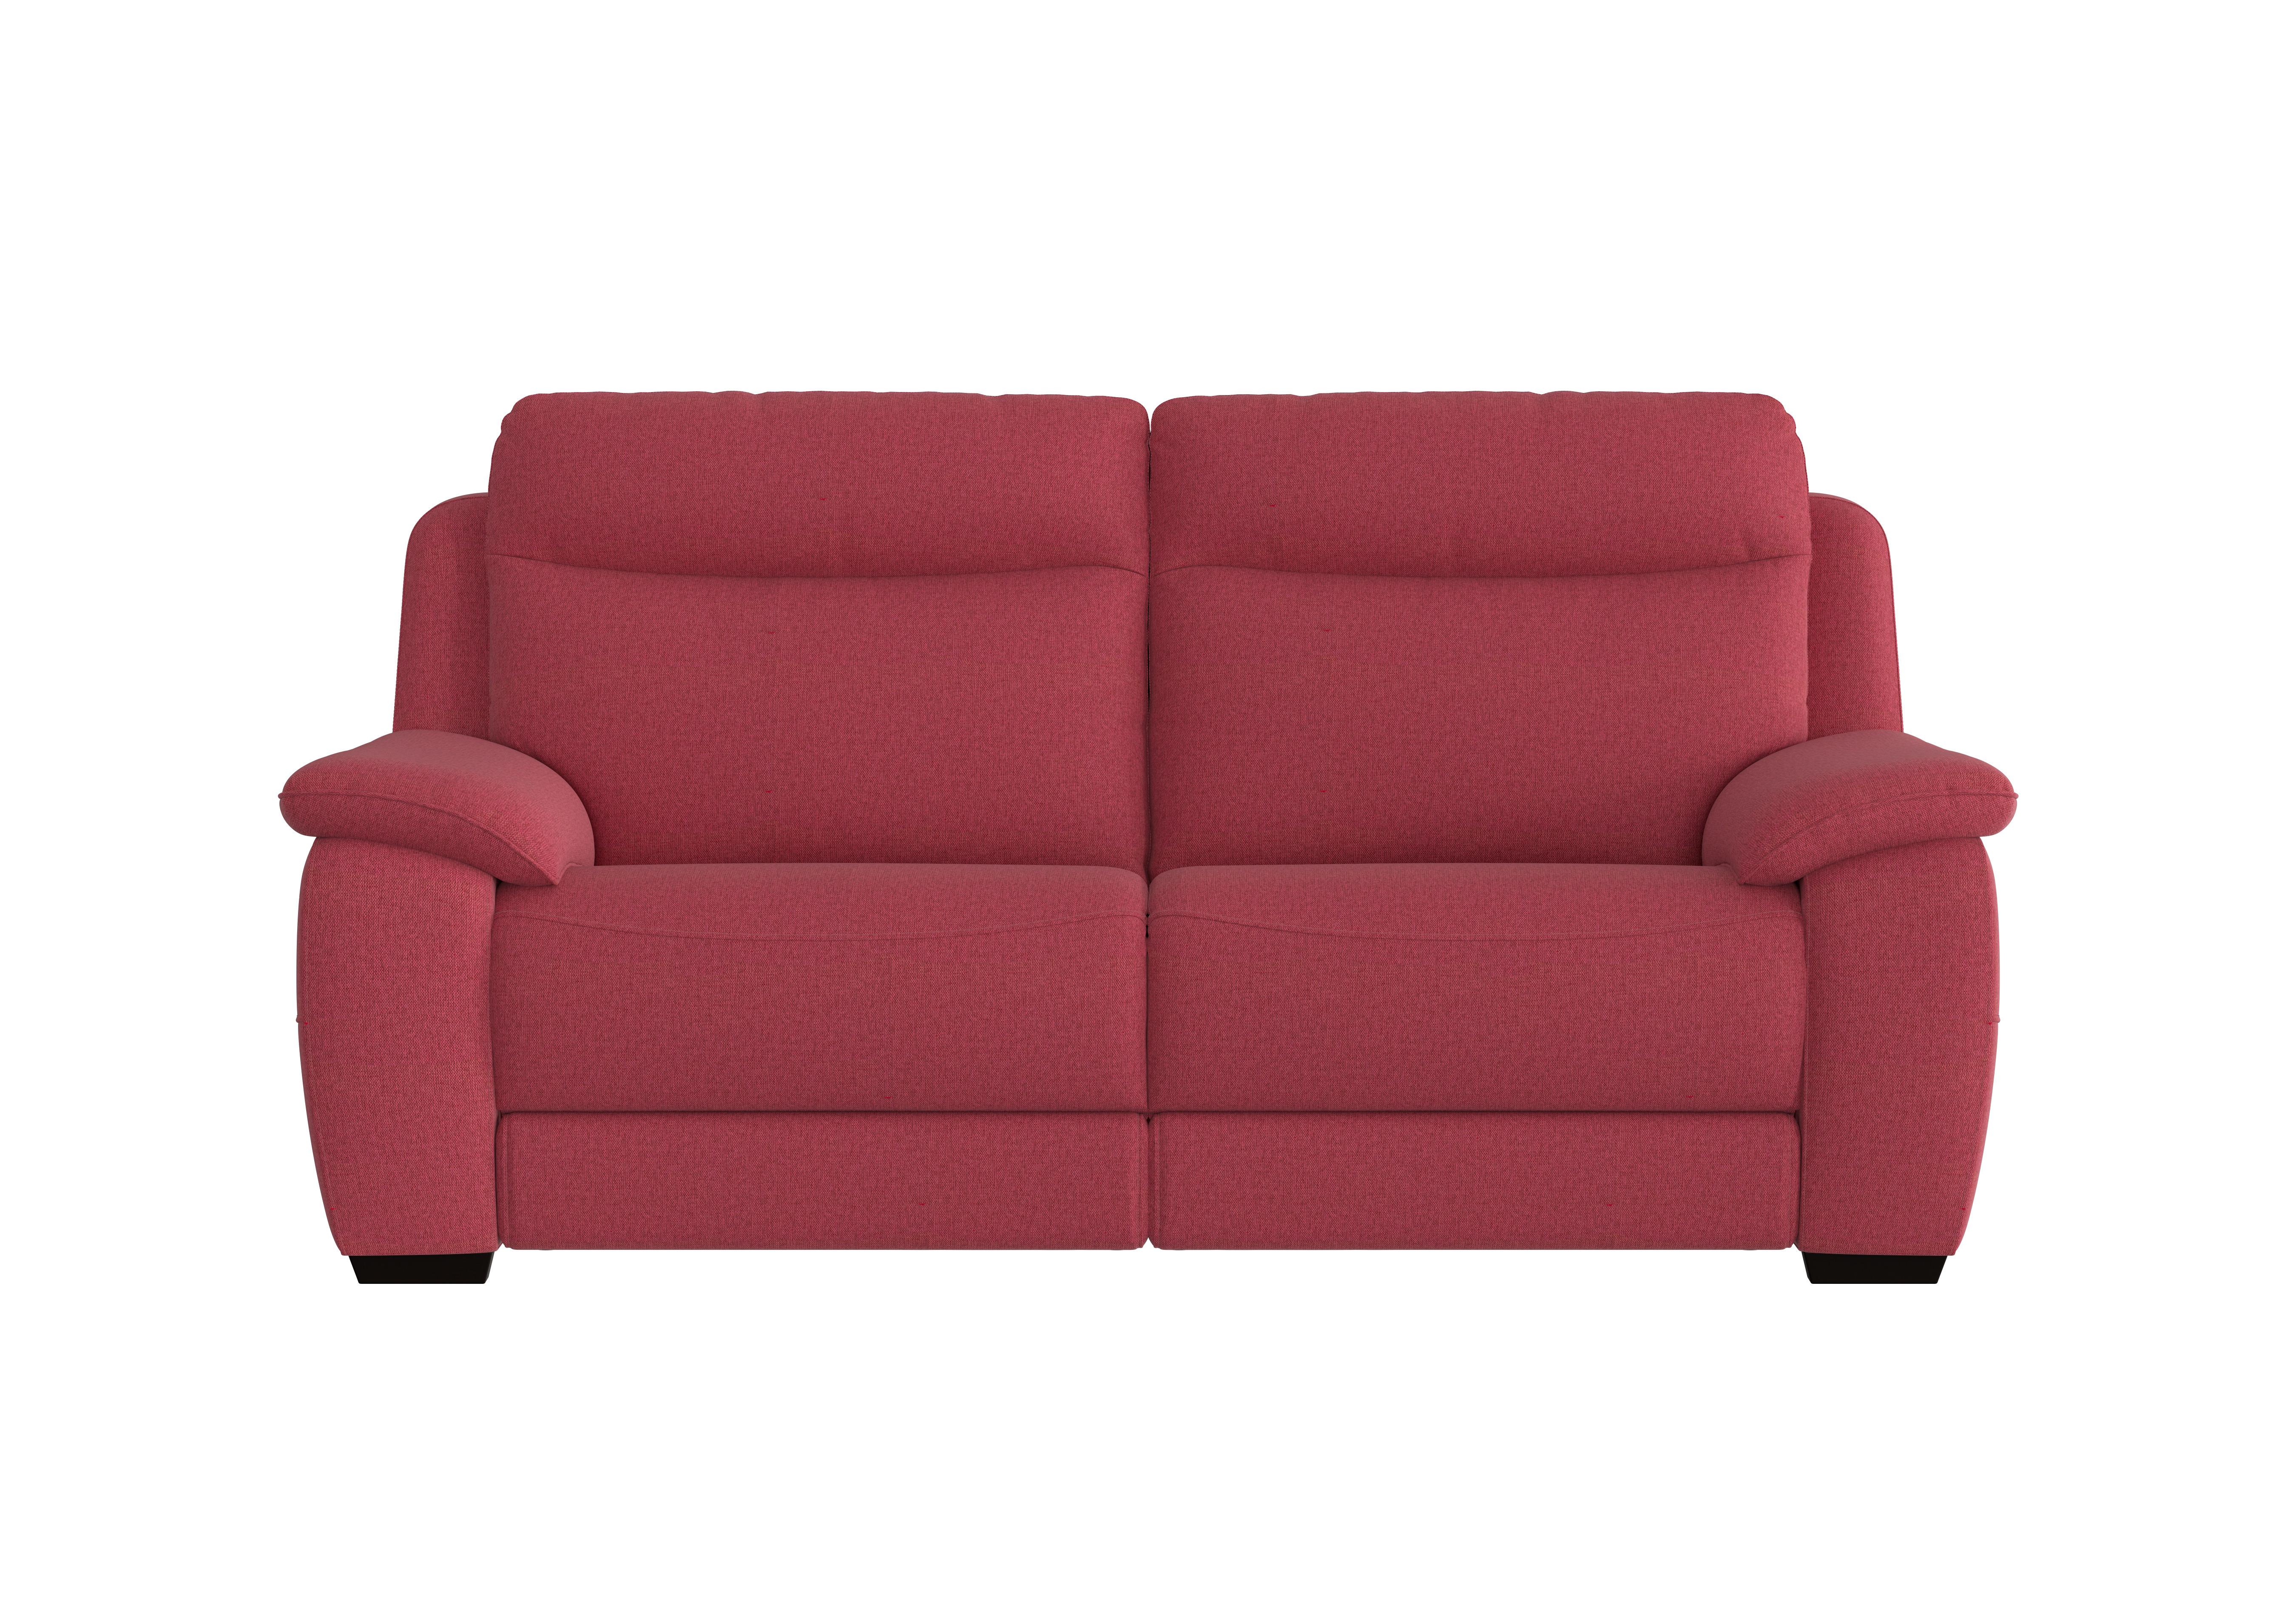 Starlight Express 3 Seater Fabric Sofa in Fab-Blt-R29 Red on Furniture Village